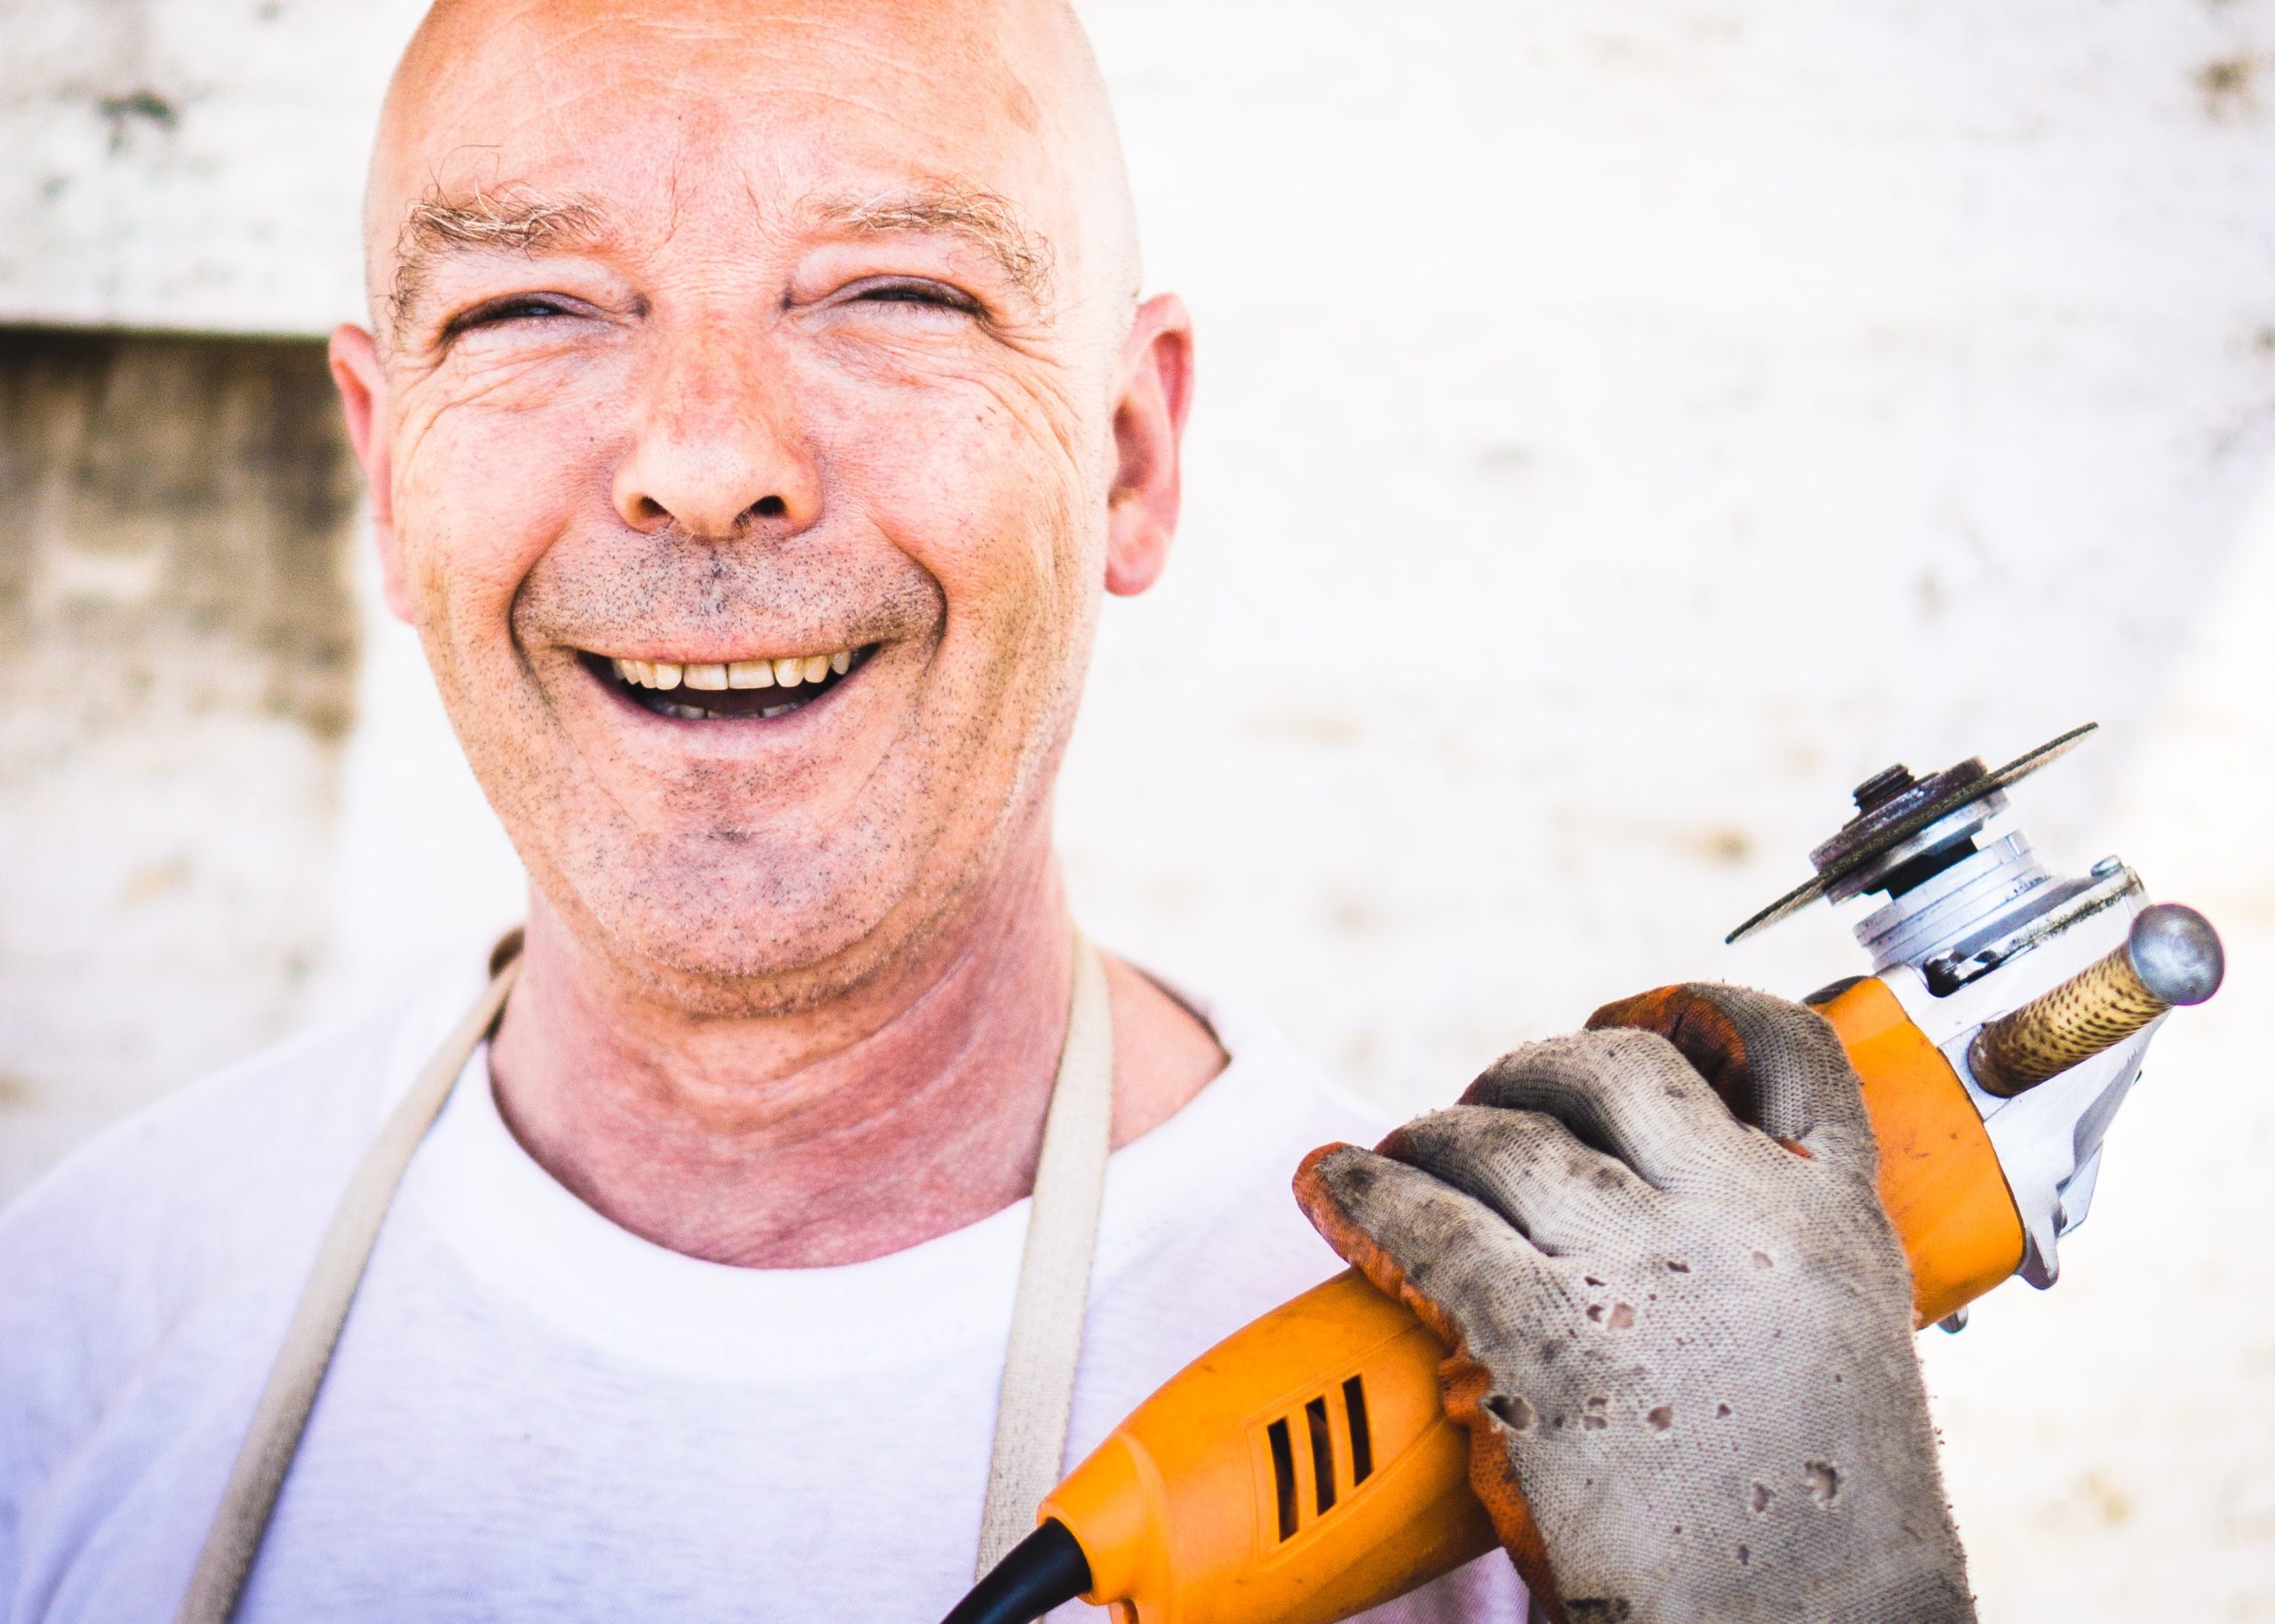 Man holding power tool and smiling. Start of third heading: how to get a job when you get out of prison